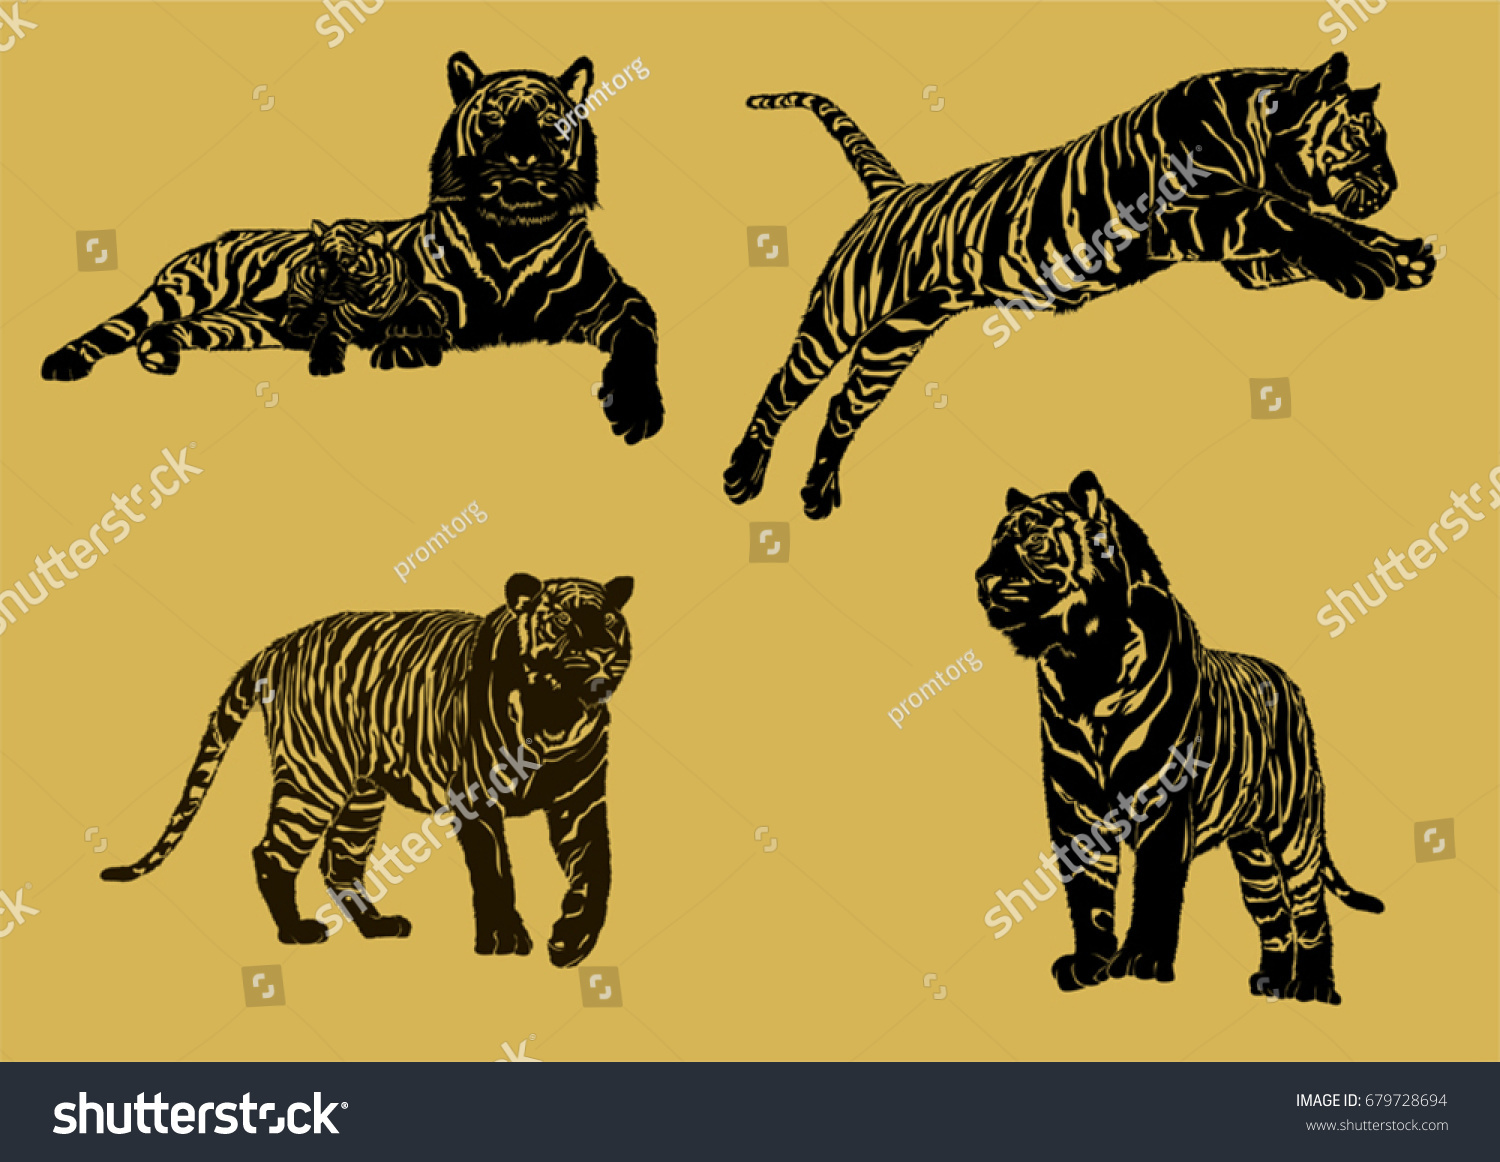 Tiger Silhouette Stock Vector Royalty Free 679728694 Shutterstock 